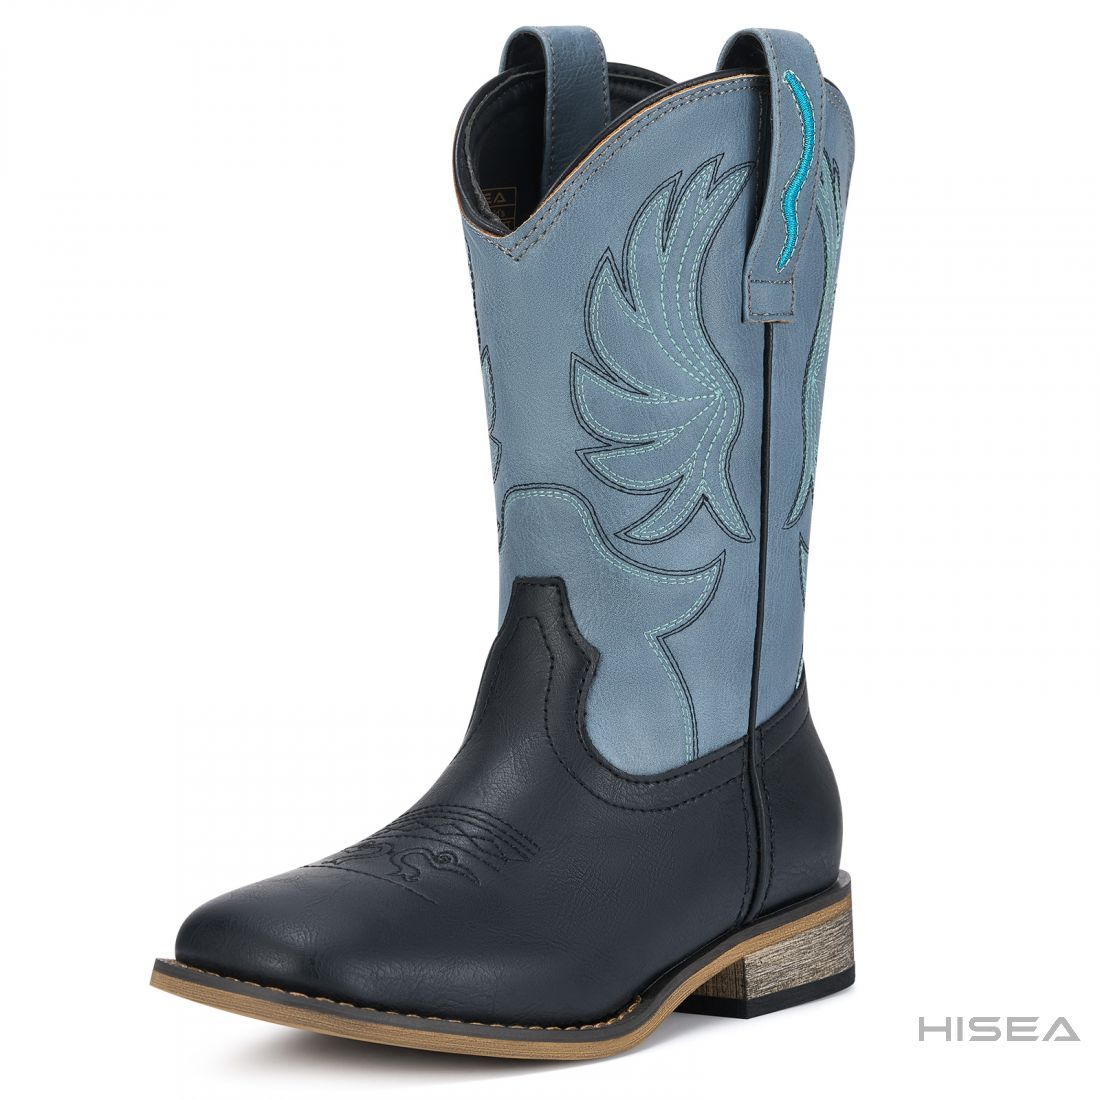 Kid's Classic Western Cowboy Boots